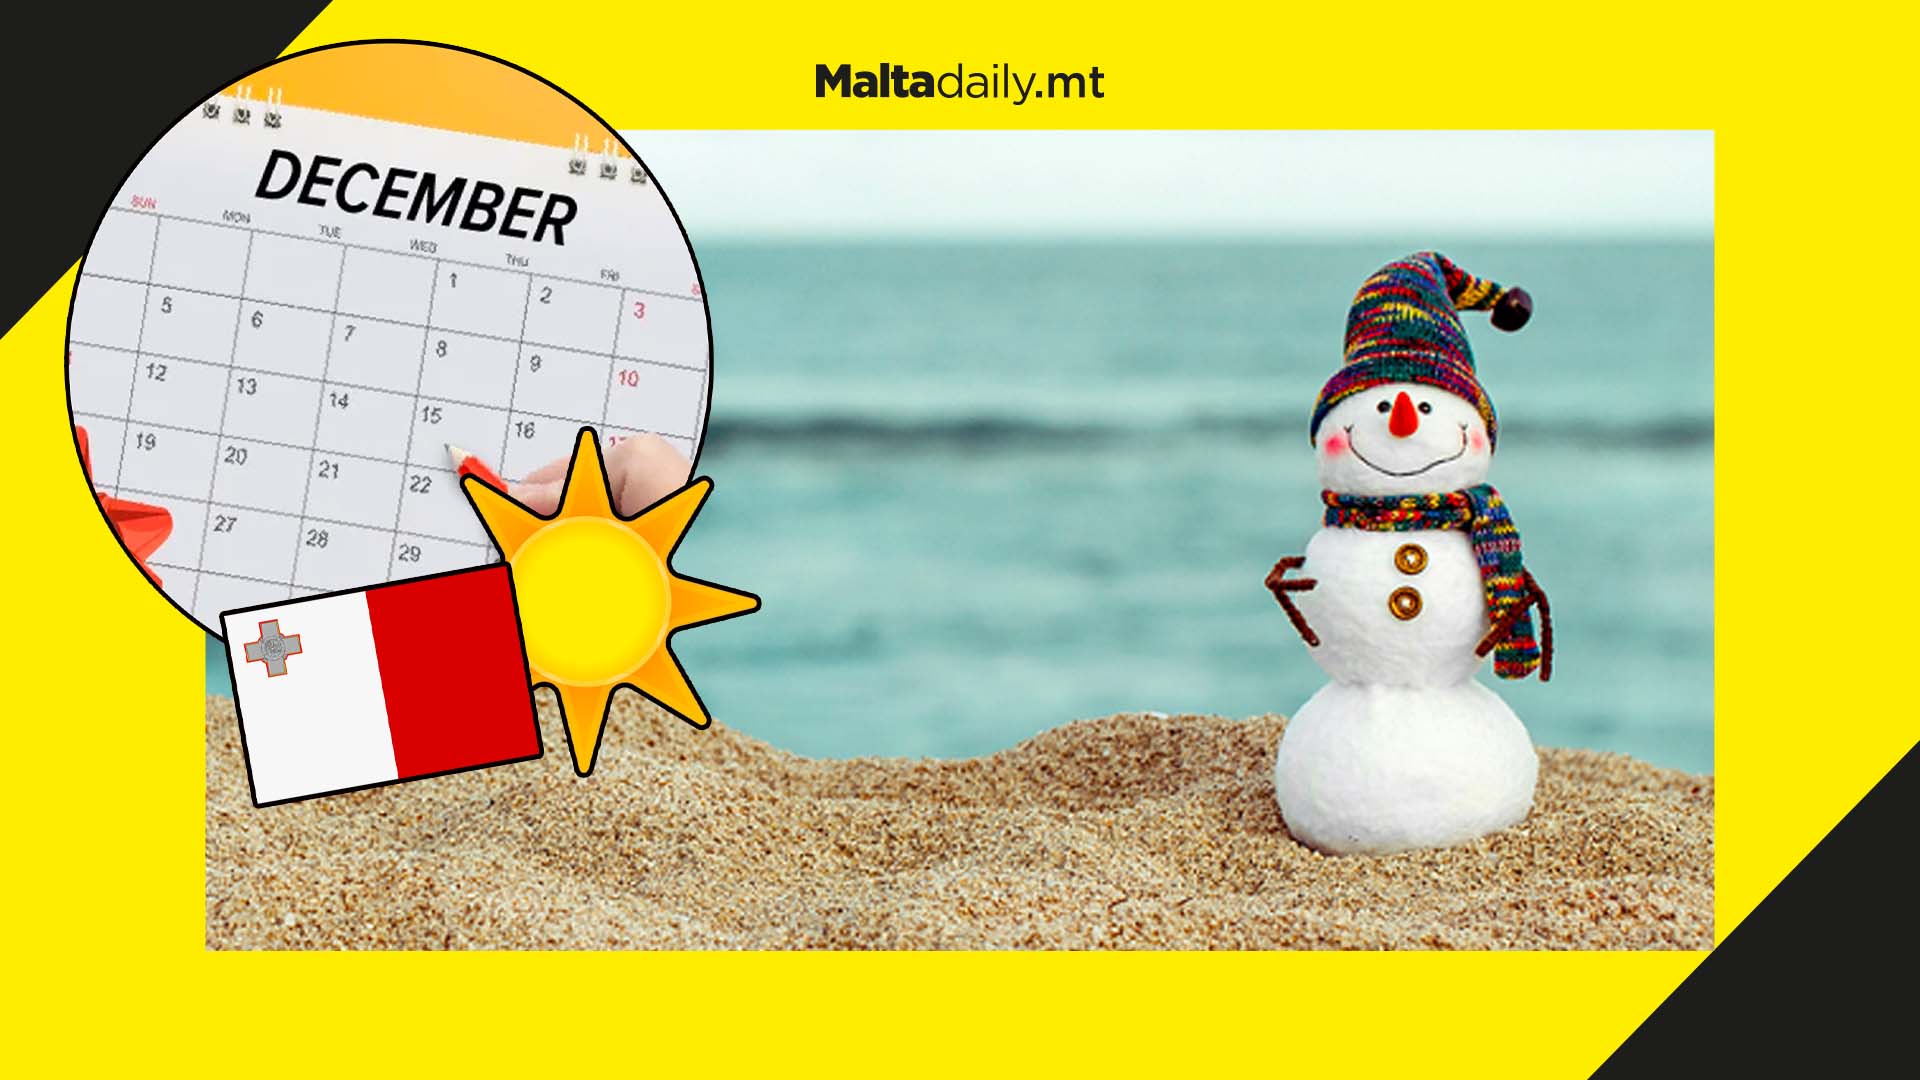 Today is set to be the warmest December day in over 60 years